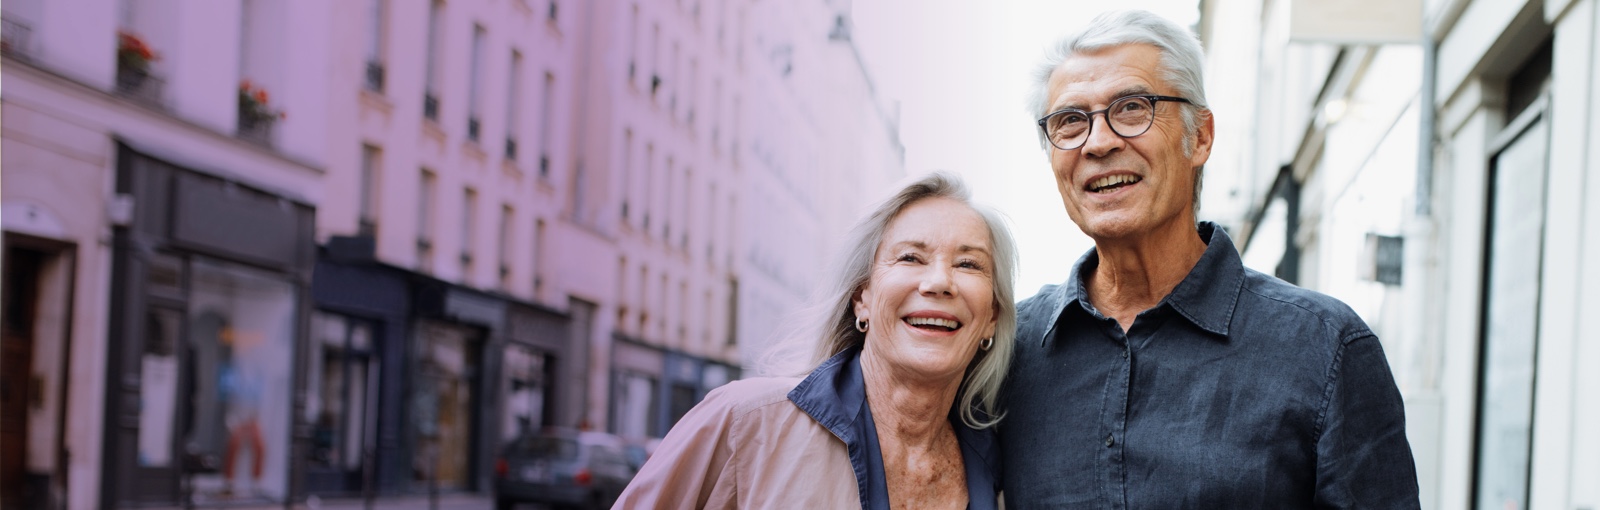 elderly couple walking through city and smiling